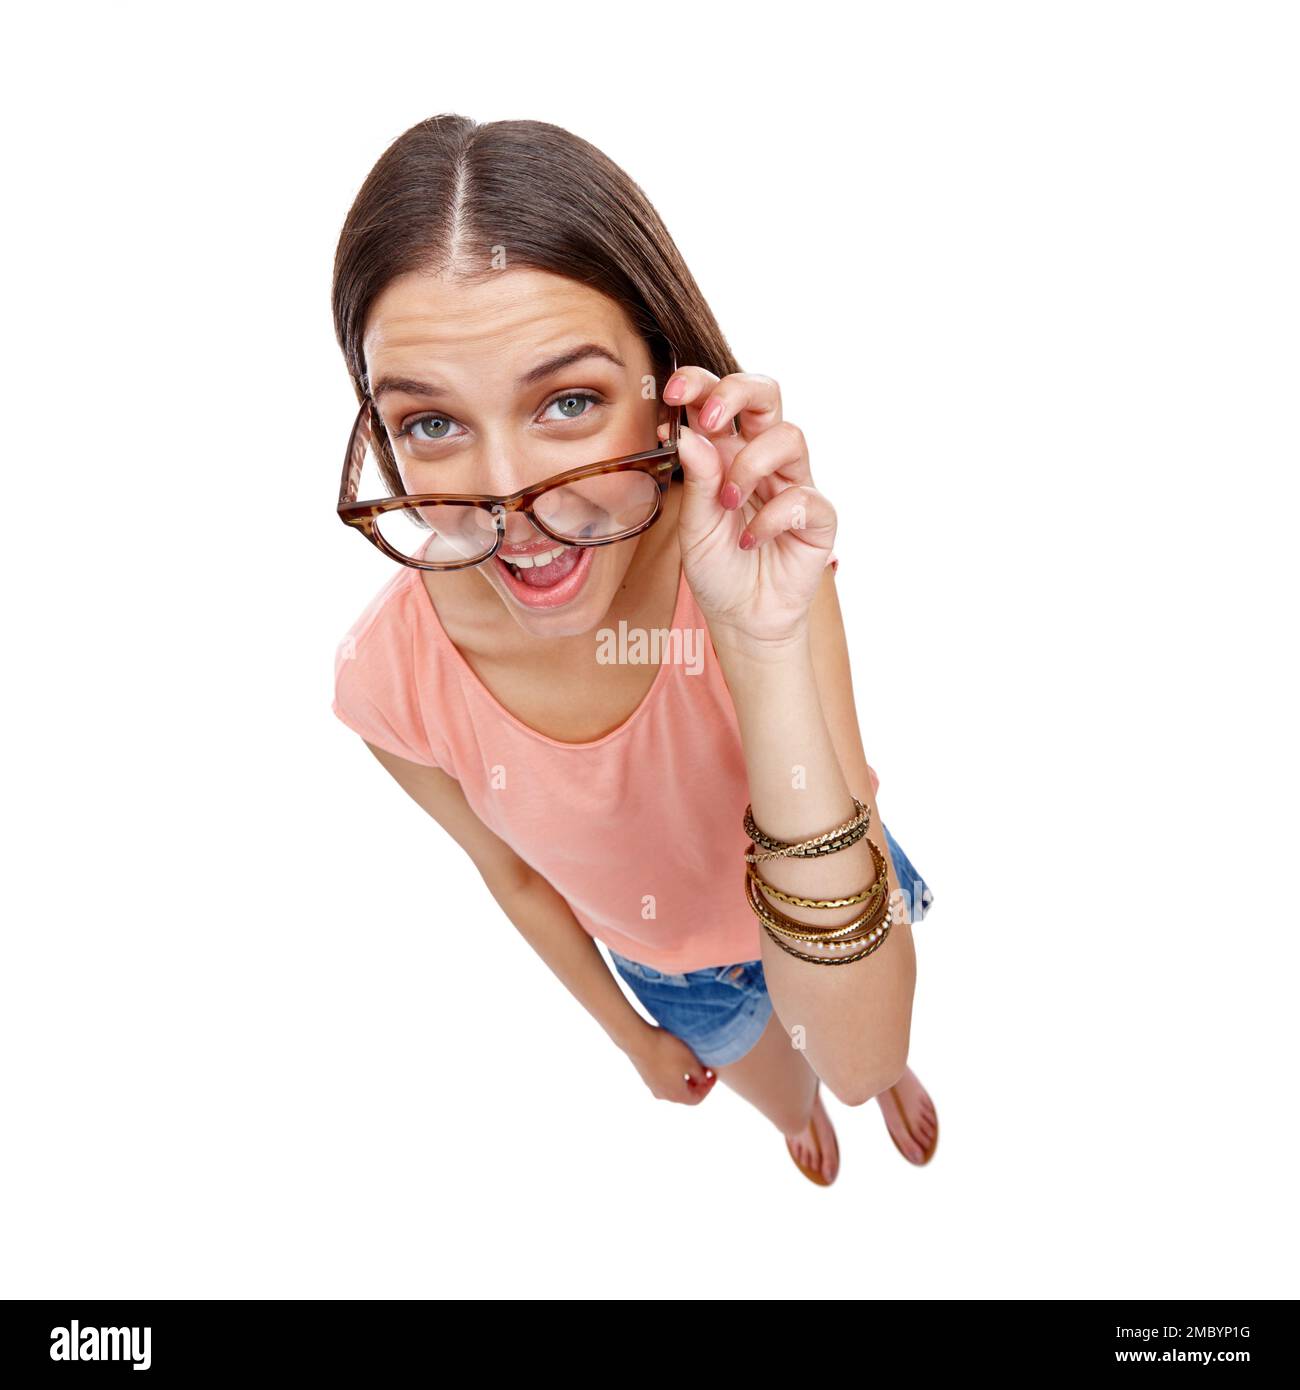 Woman, comedy and portrait of a model with glasses, smile and casual fashion being silly. White background, happiness and isolated young person Stock Photo